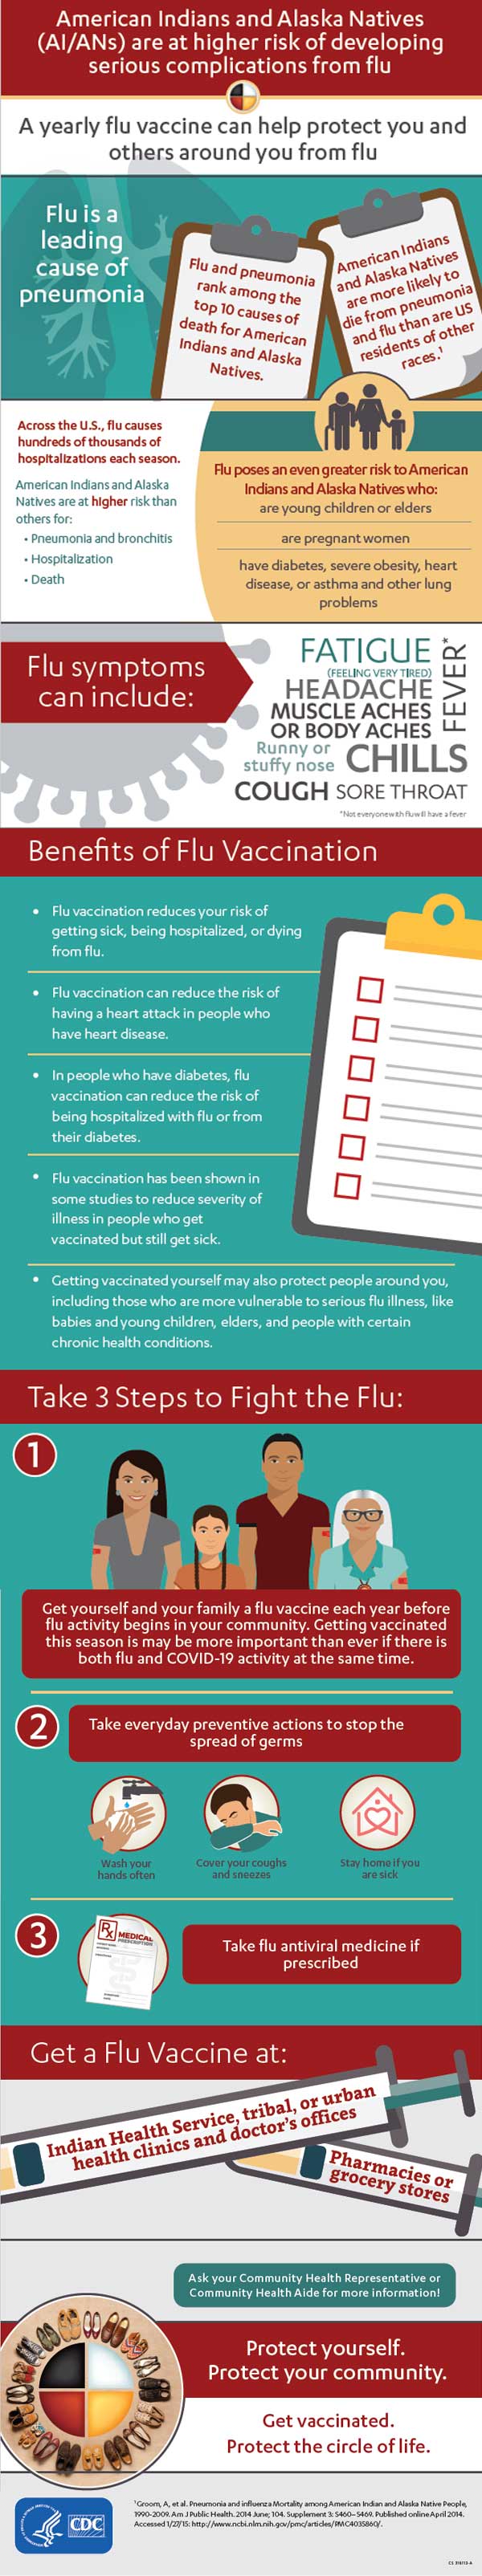 American Indians and Alaska Natives (AI/ANs) are at higher risk of developing serious complications from flu